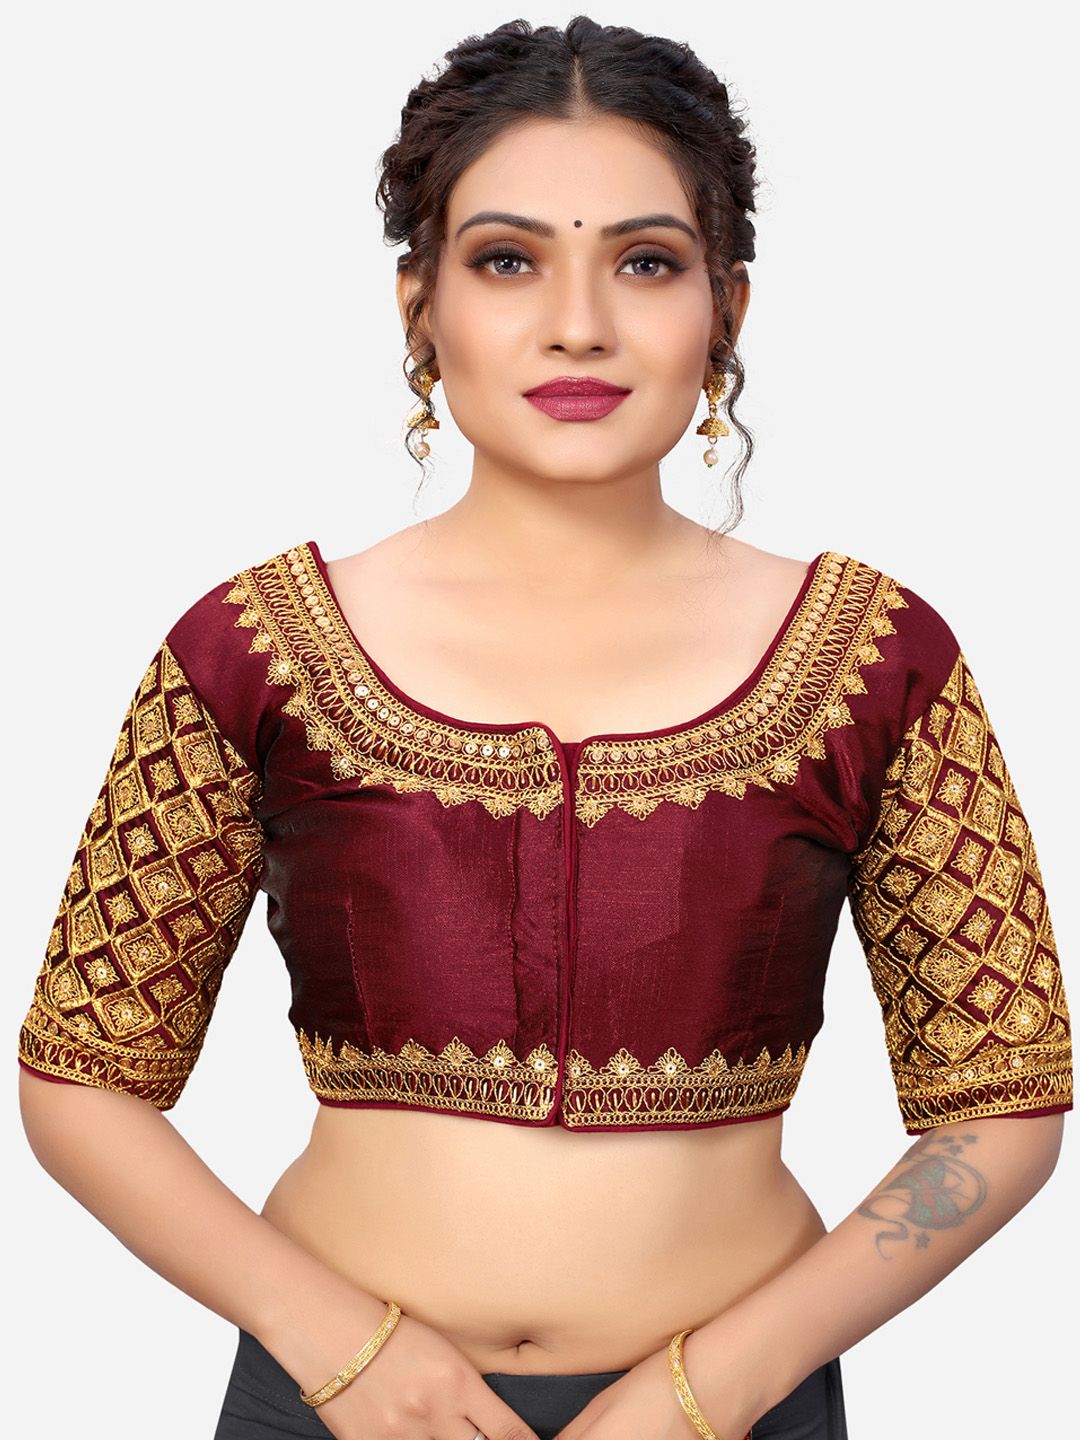 SIRIL Women Maroon Embroidered Silk Saree Blouse Price in India